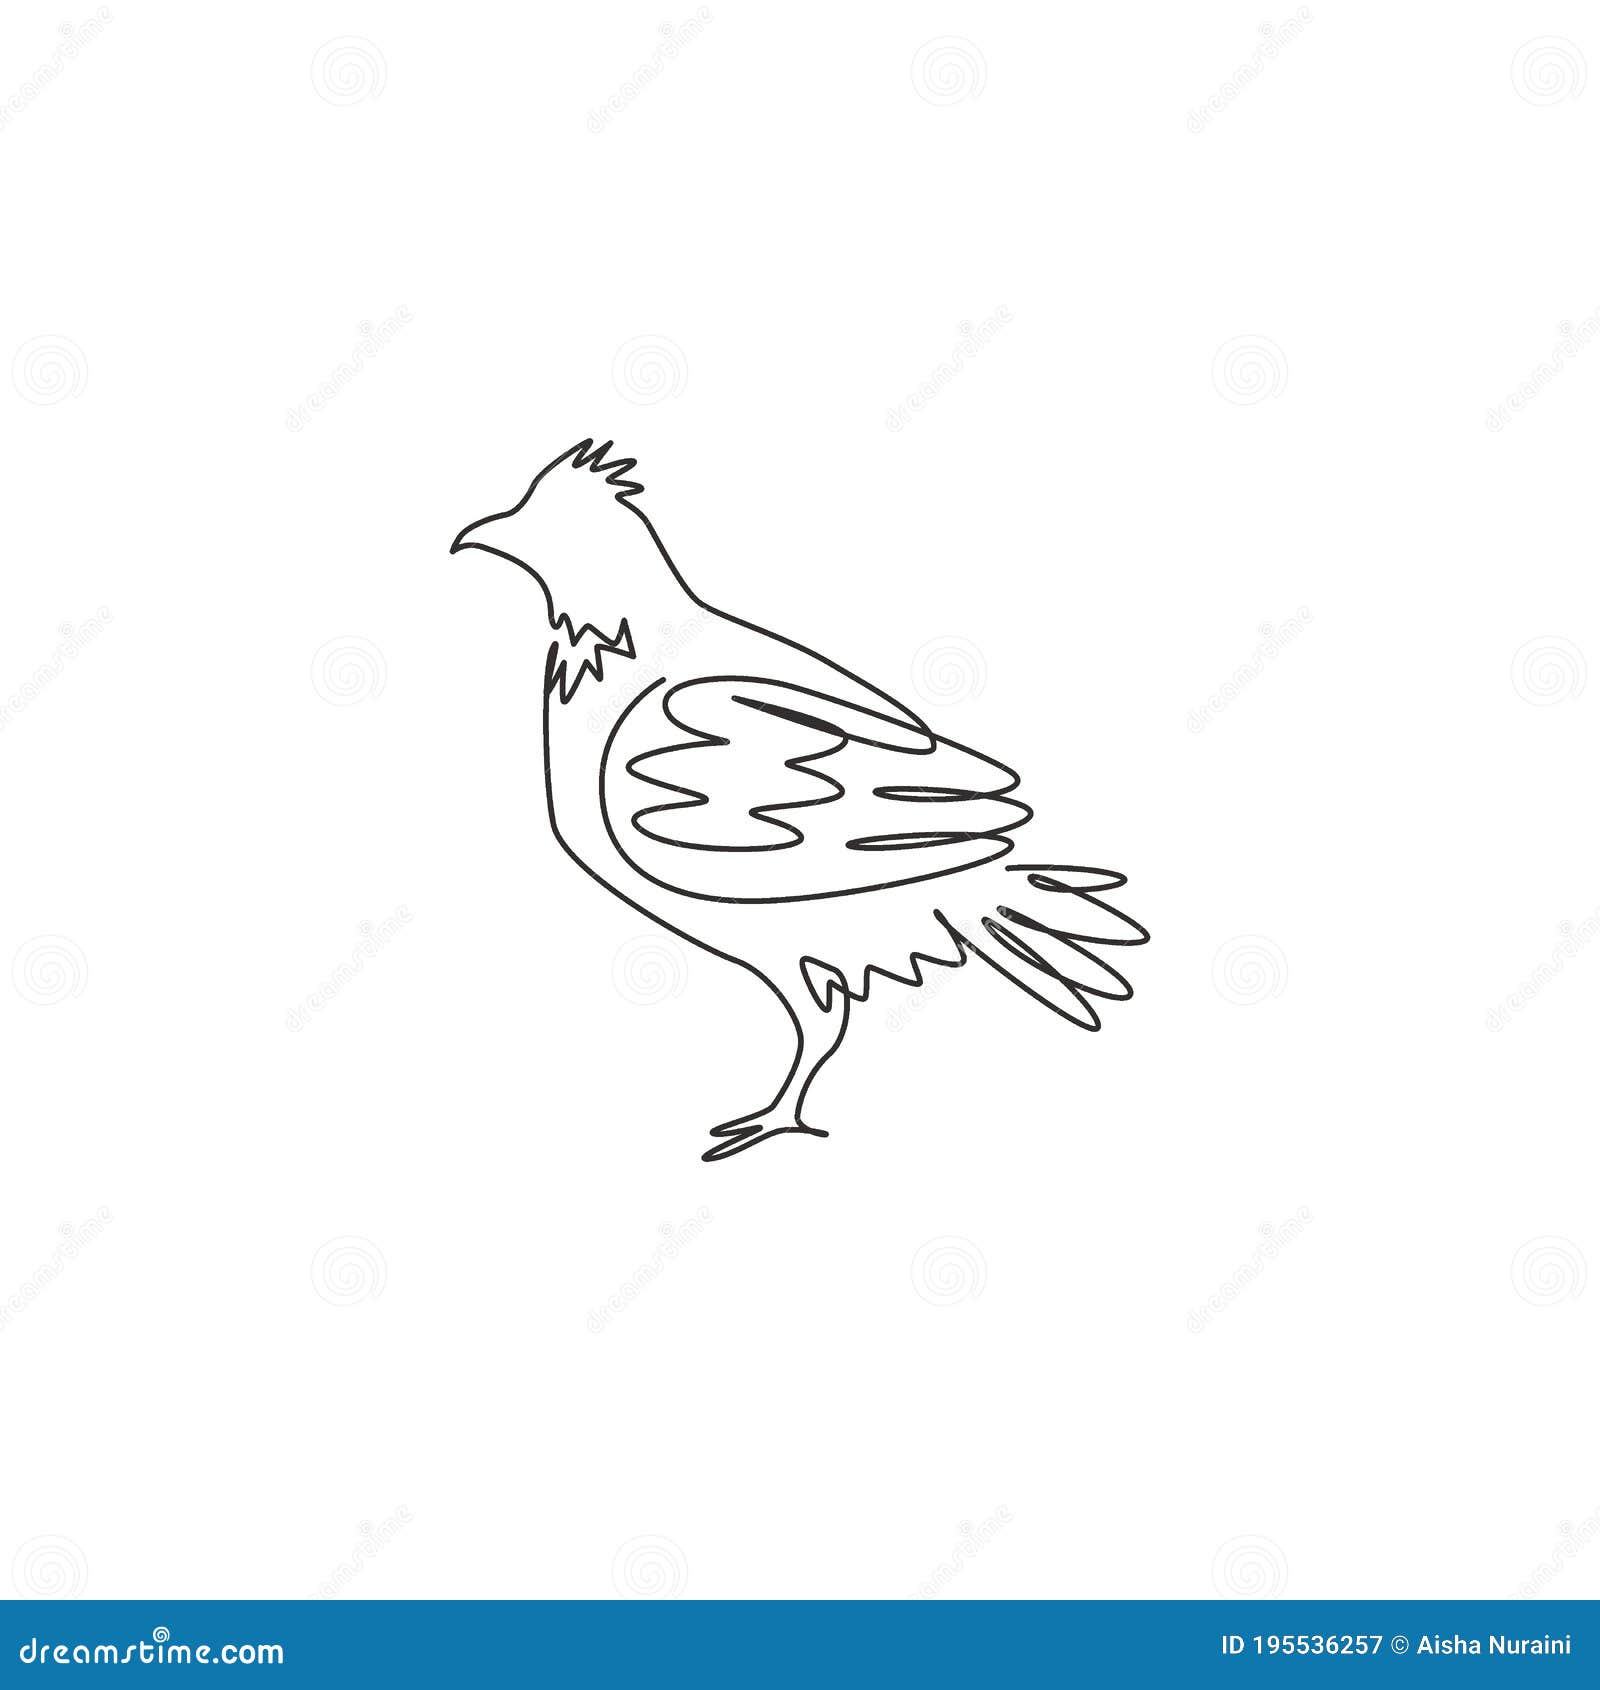 single one line drawing of adorable grouse bird for foundation logo identity. shooting bird syndicate mascot concept for tradition